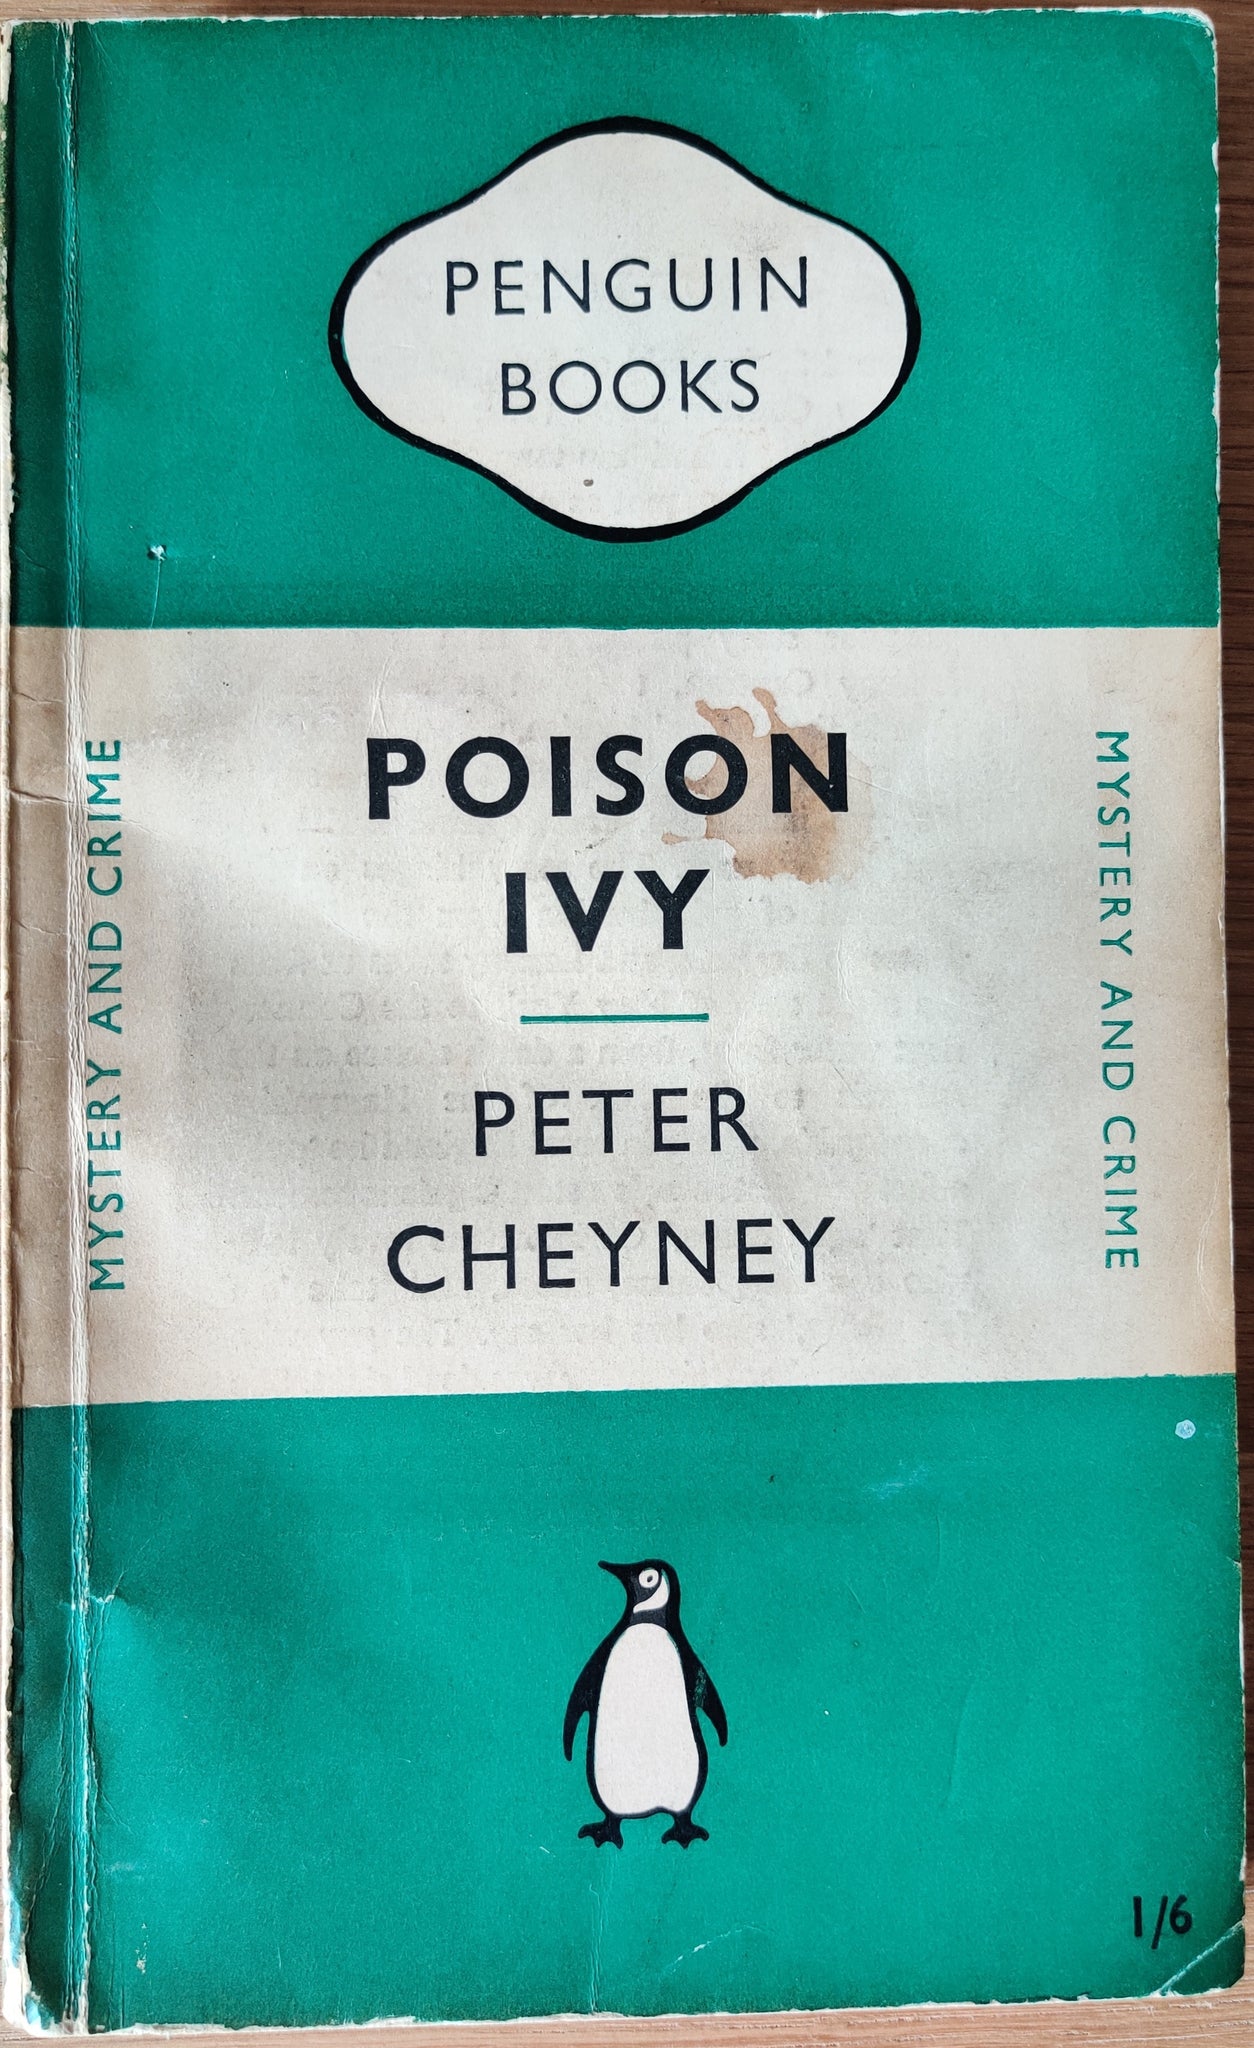 Poison Ivy by Peter Cheyney